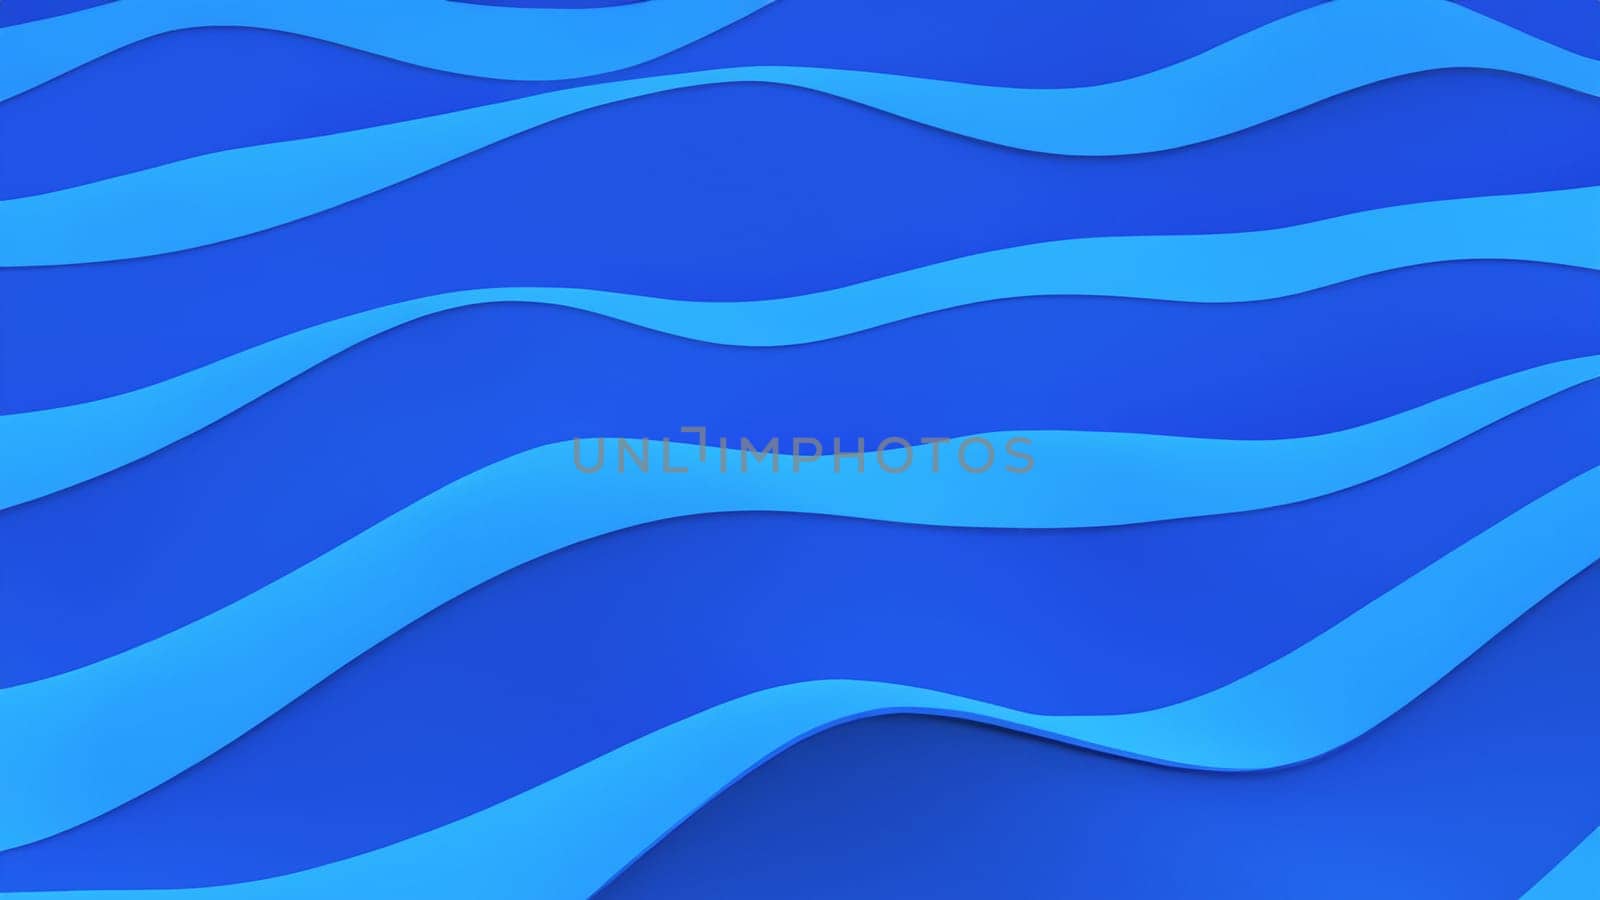 Abstract 3D rendering of blue wavy surface. Paper cut out style. Decorative background with turquoise waves.